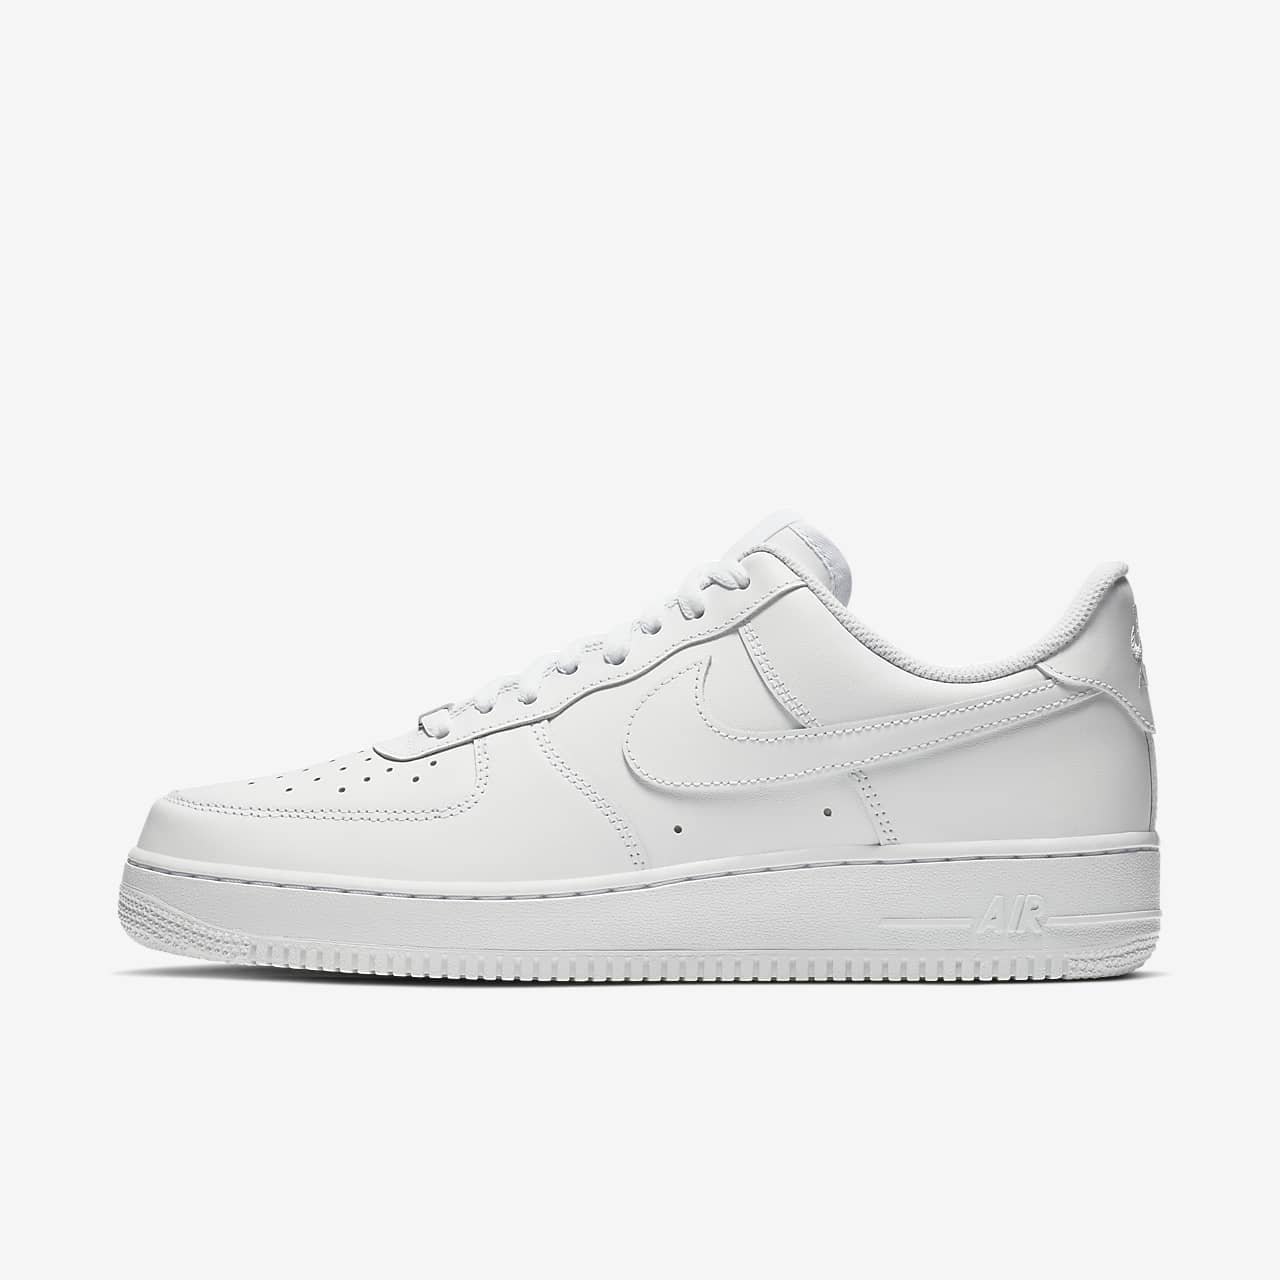 air force 1 07 bianche e rosse